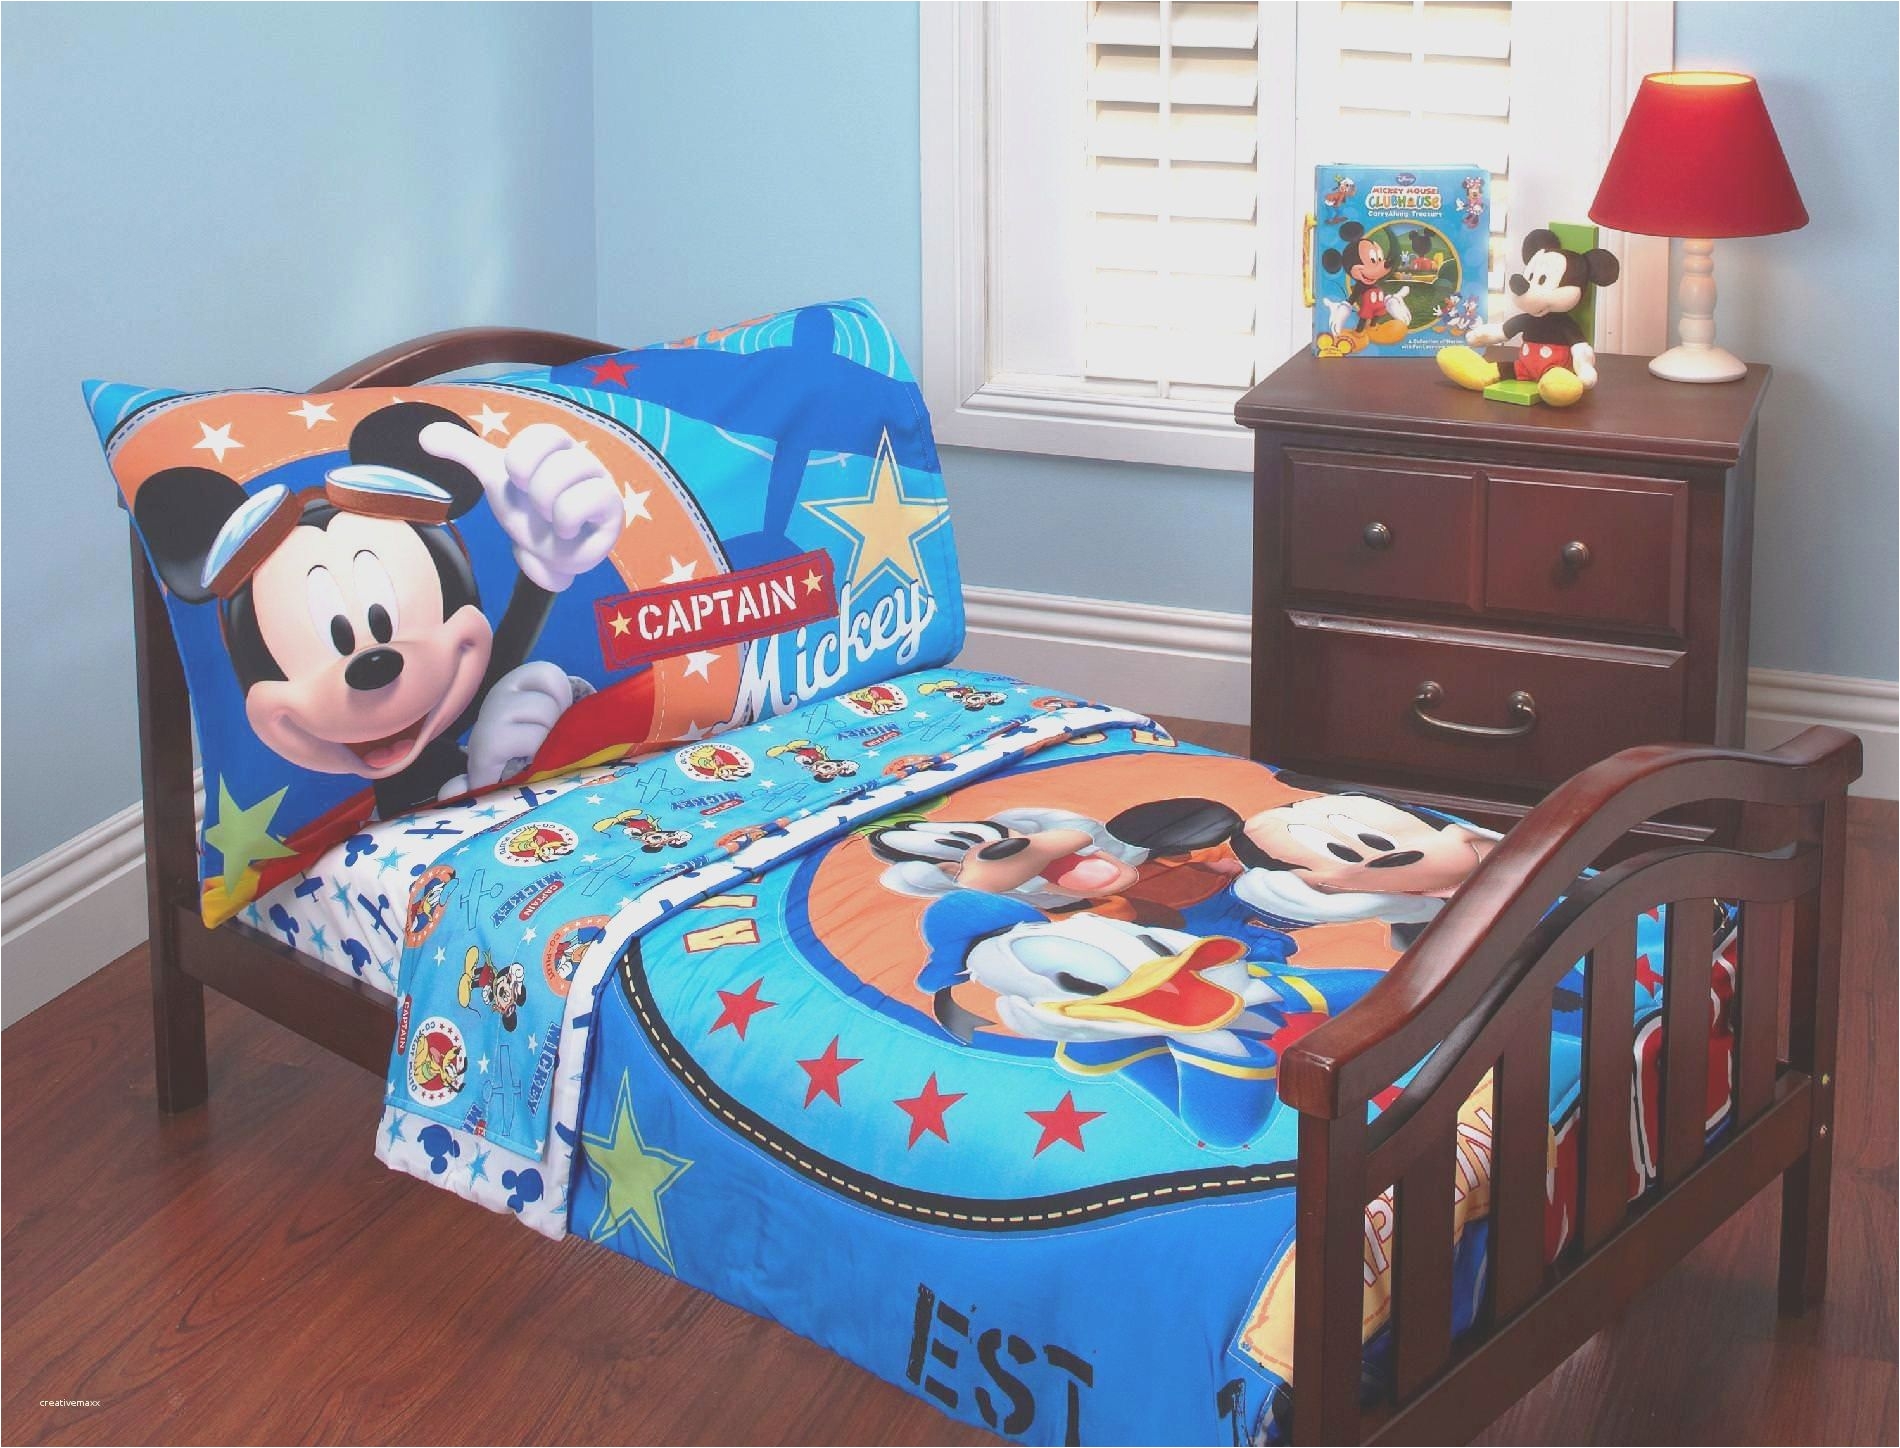 Minnie Mouse Bedroom Set Full Size New Disney House Decorations Ideas Mickey Mouse 24 Inspiration